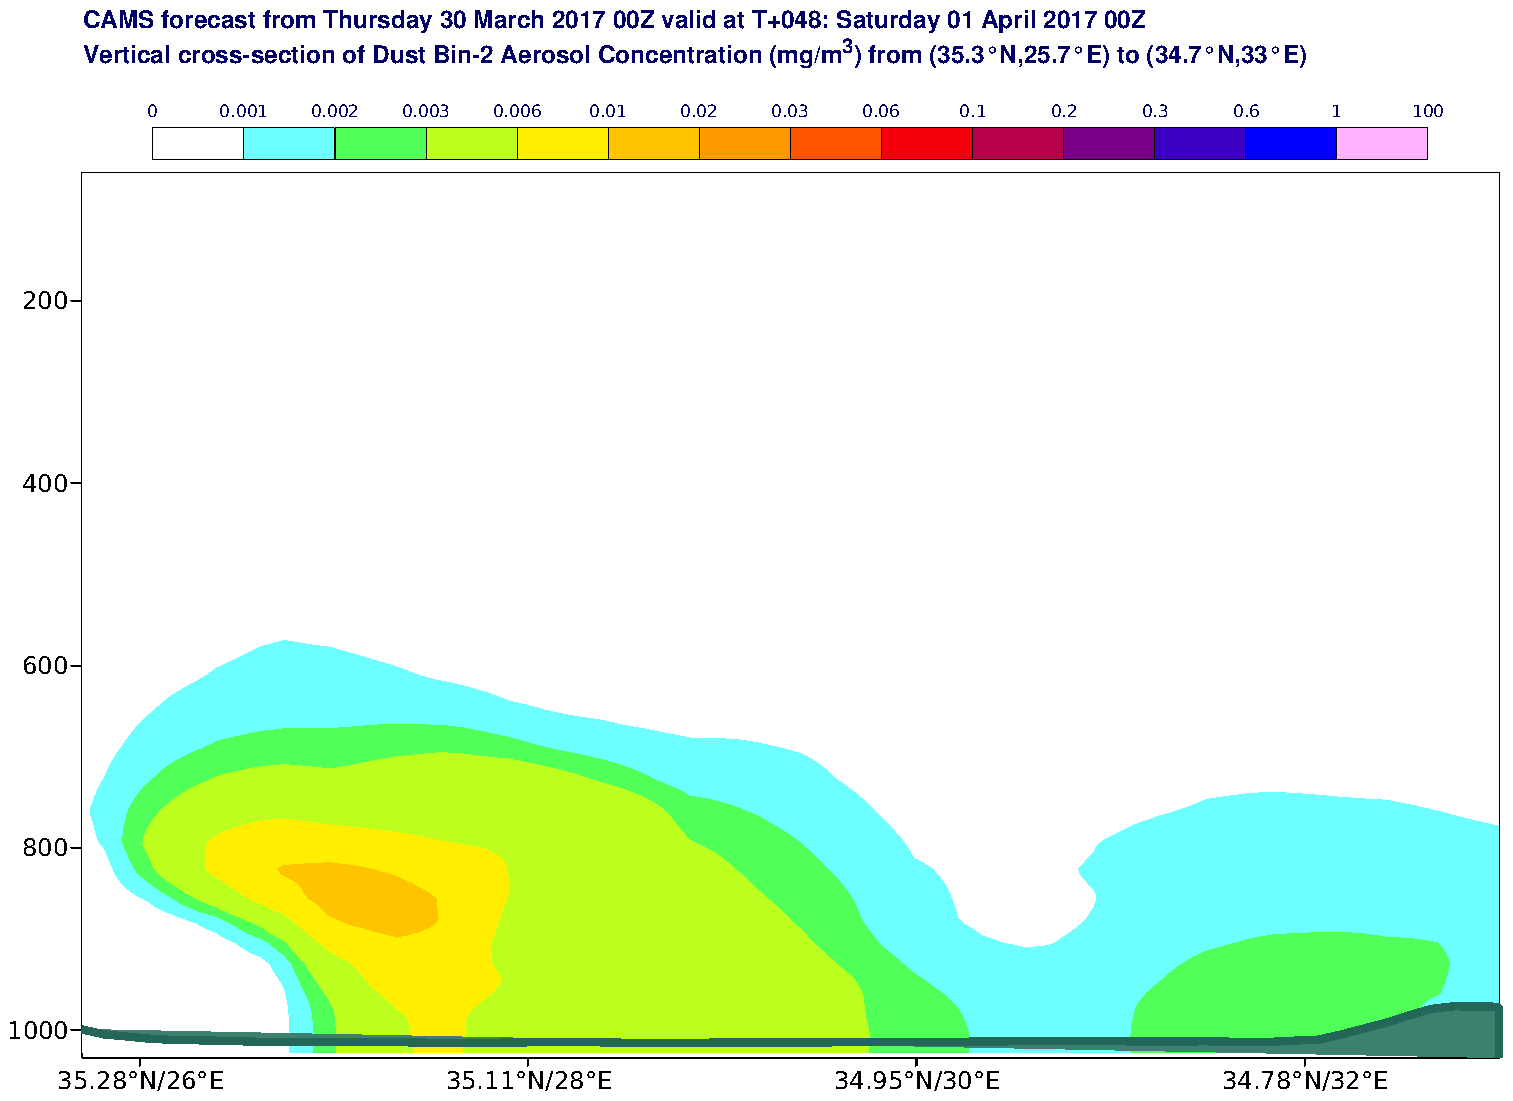 Vertical cross-section of Dust Bin-2 Aerosol Concentration (mg/m3) valid at T48 - 2017-04-01 00:00